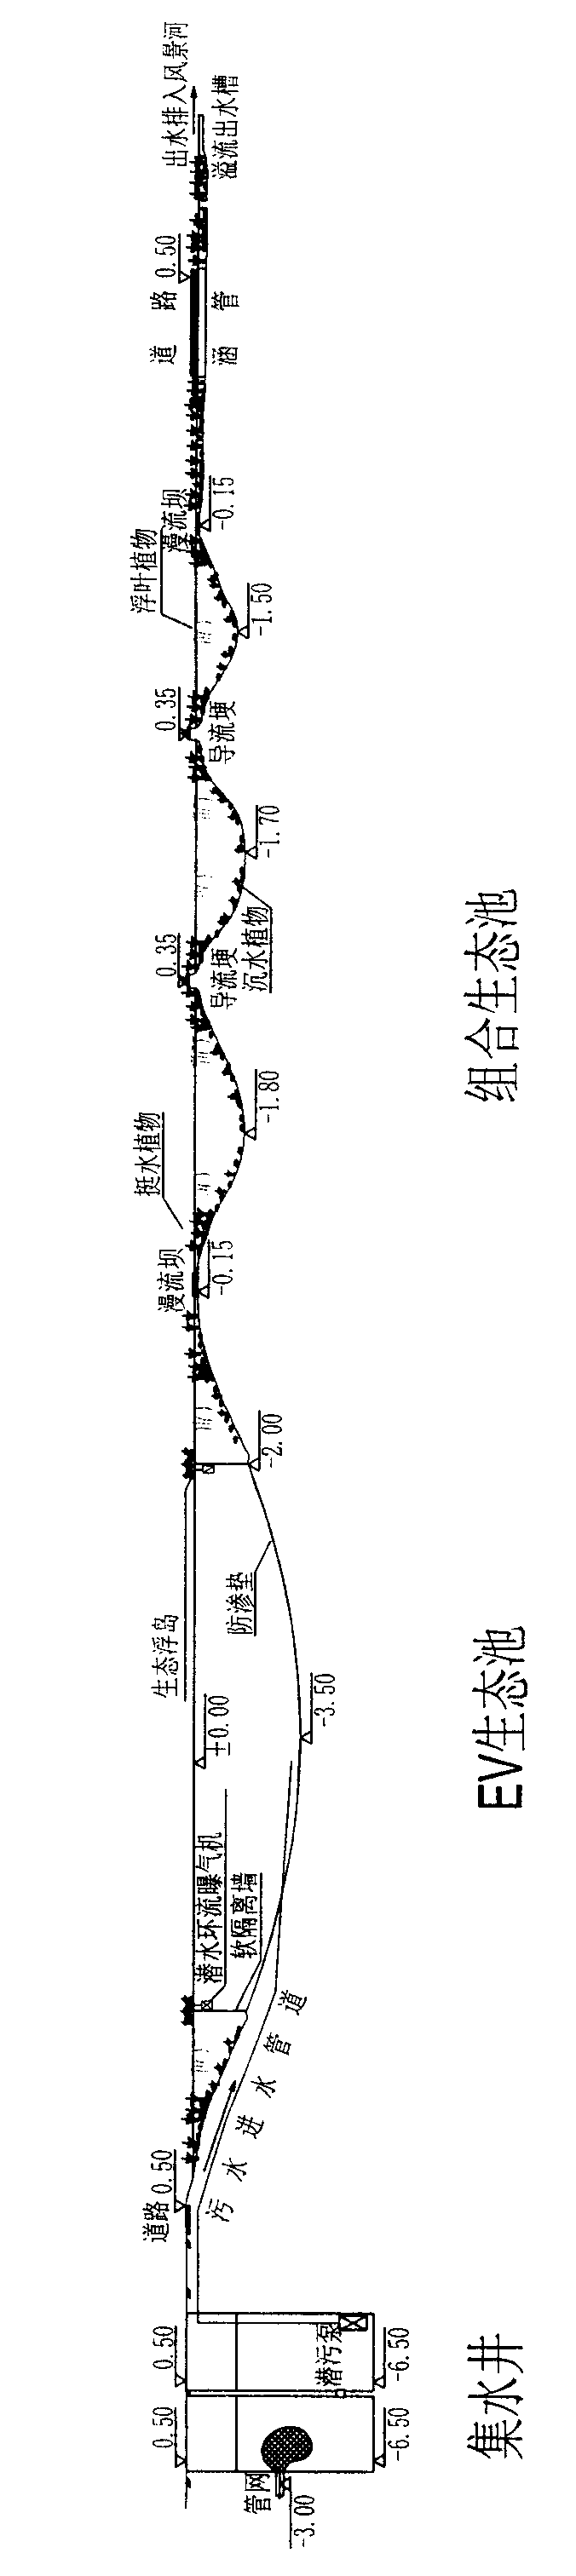 Construction method of ecological sewage treatment and water restoration system